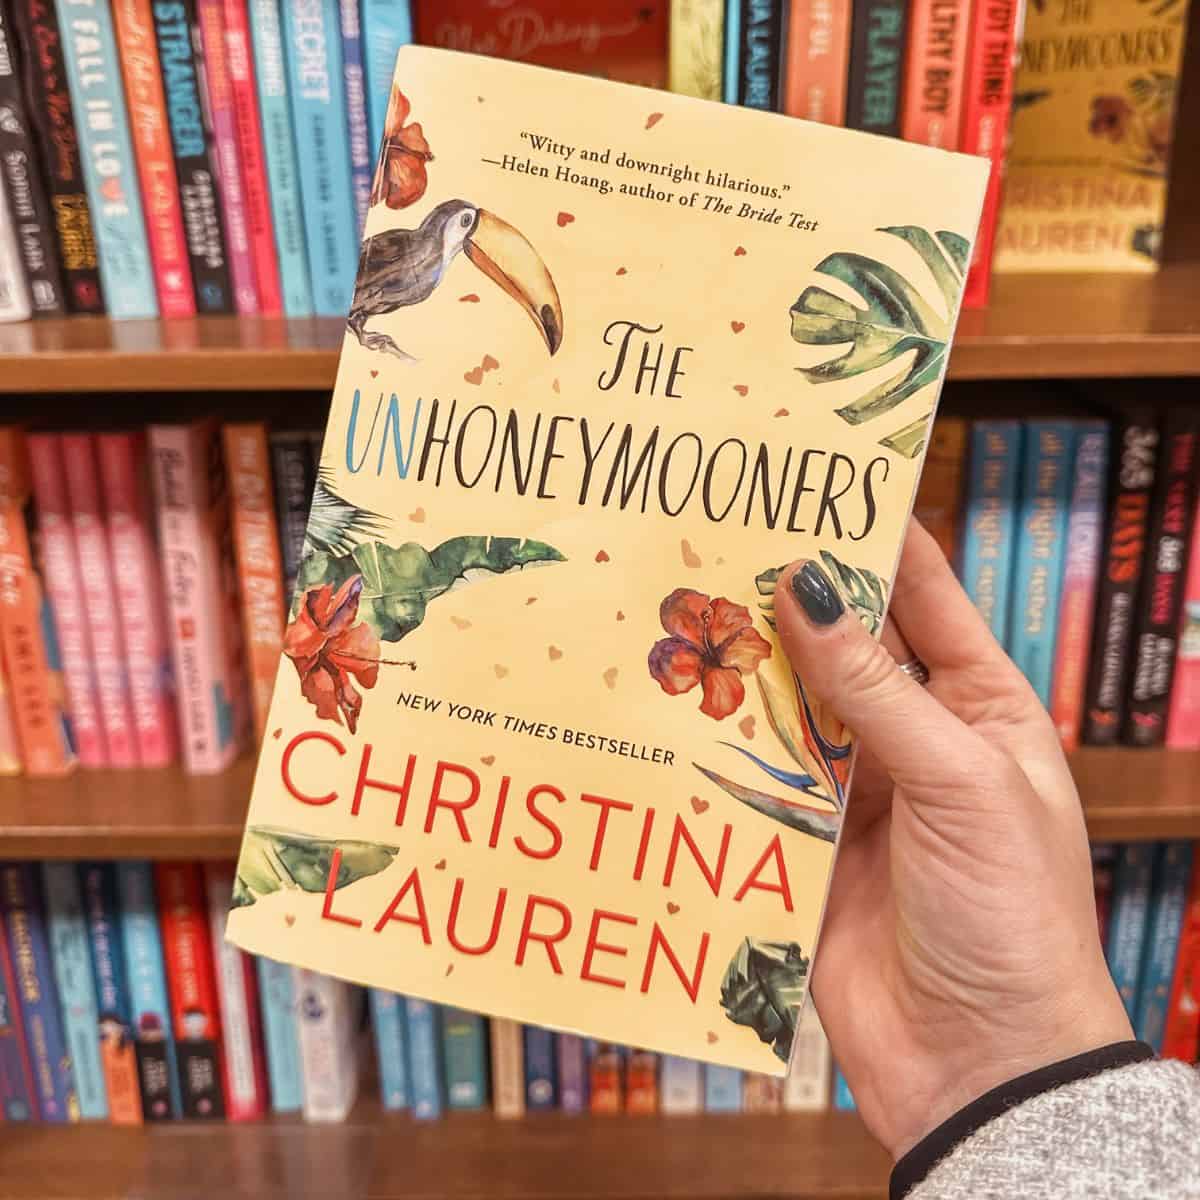 Guide to The Unhoneymooners Book Series by Christina Lauren